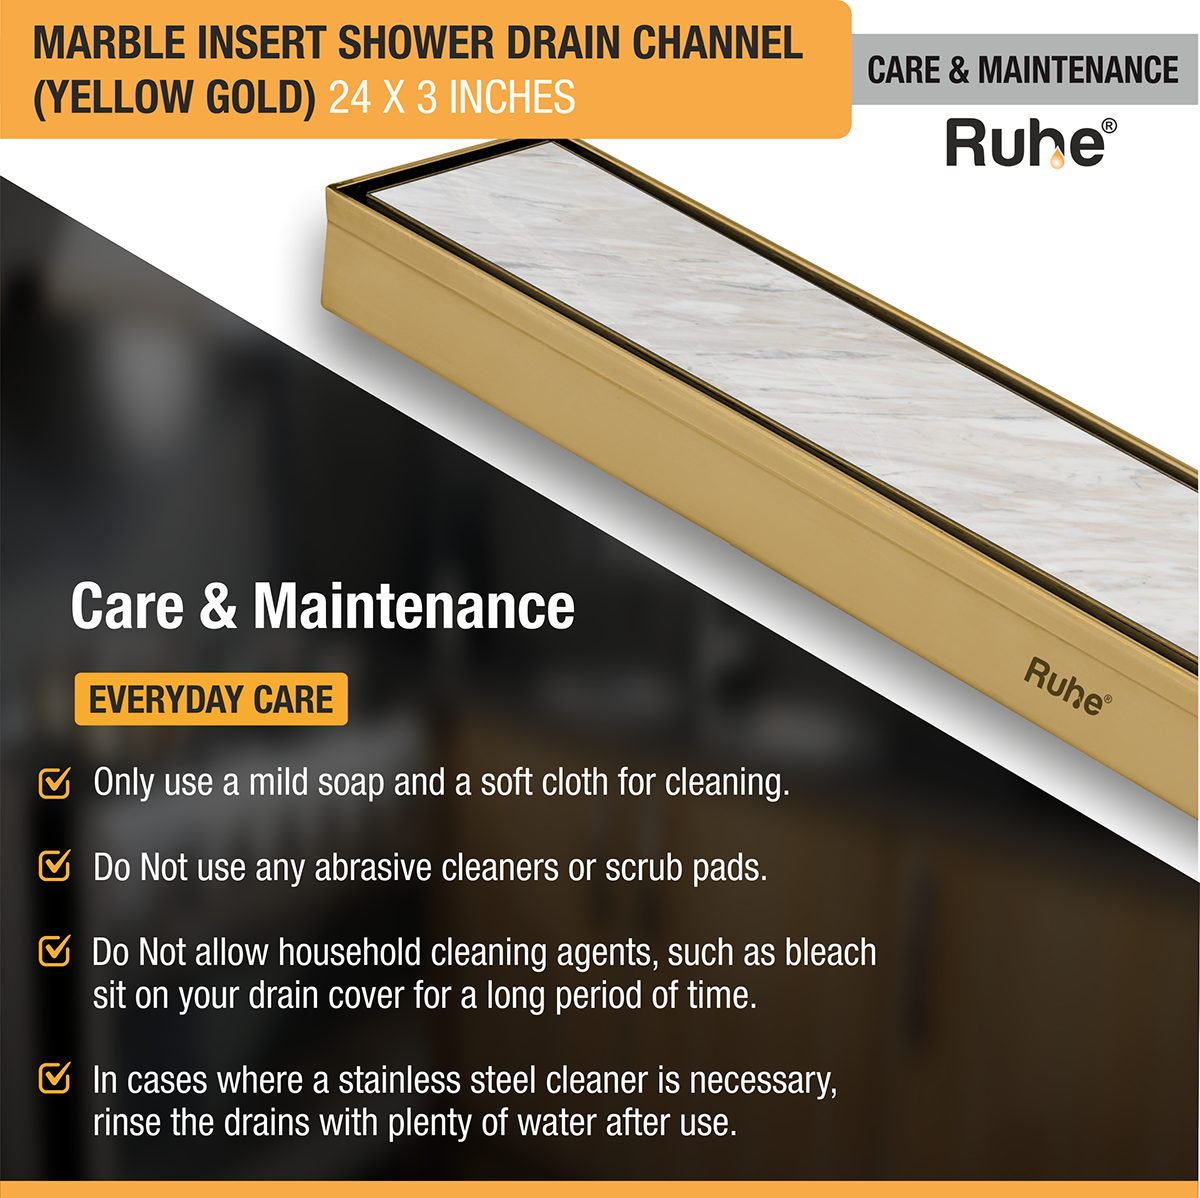 Marble Insert Shower Drain Channel (24 x 3 Inches) YELLOW GOLD PVD Coated care and maintenance